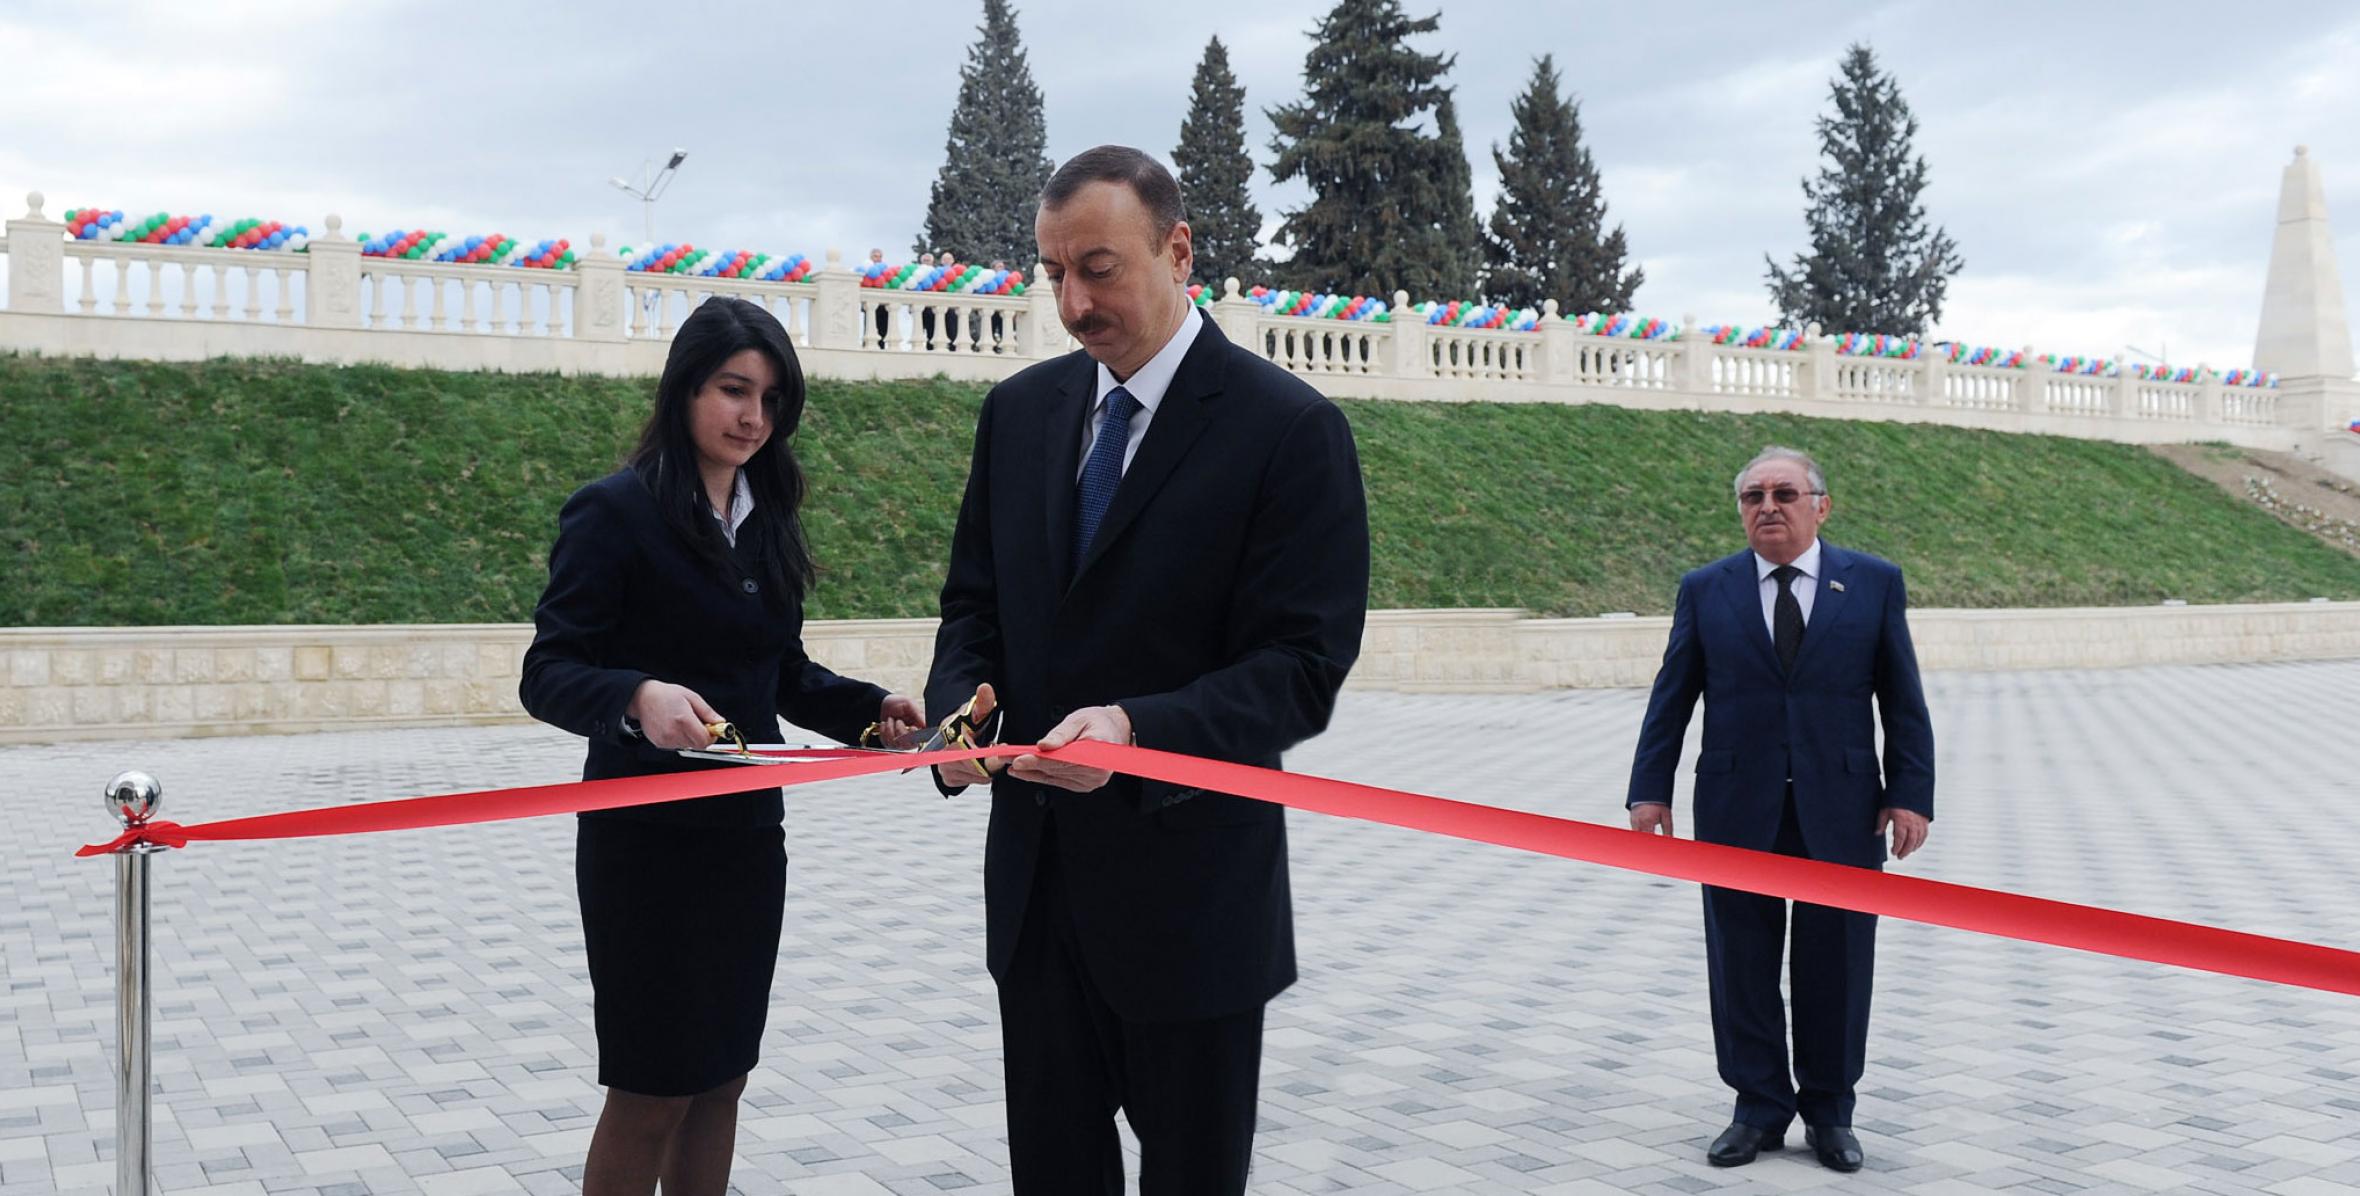 Ilham Aliyev attended the opening of the Gazakh youth center as part of a visit to the north-western region